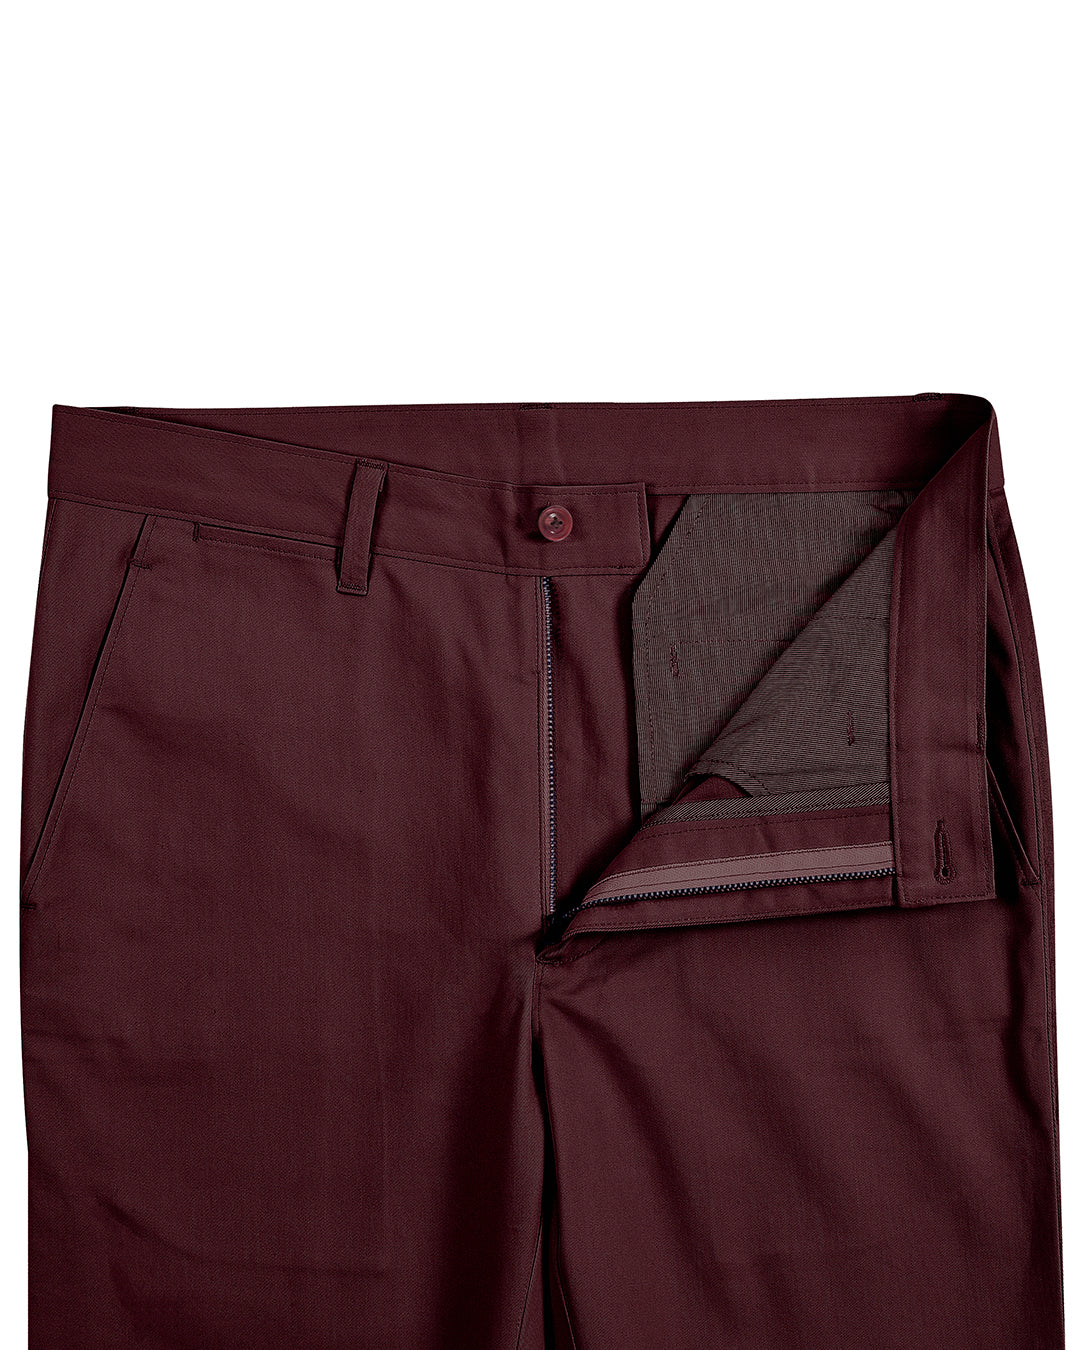 Front open view of custom Genoa Chino pants for men by Luxire in plum